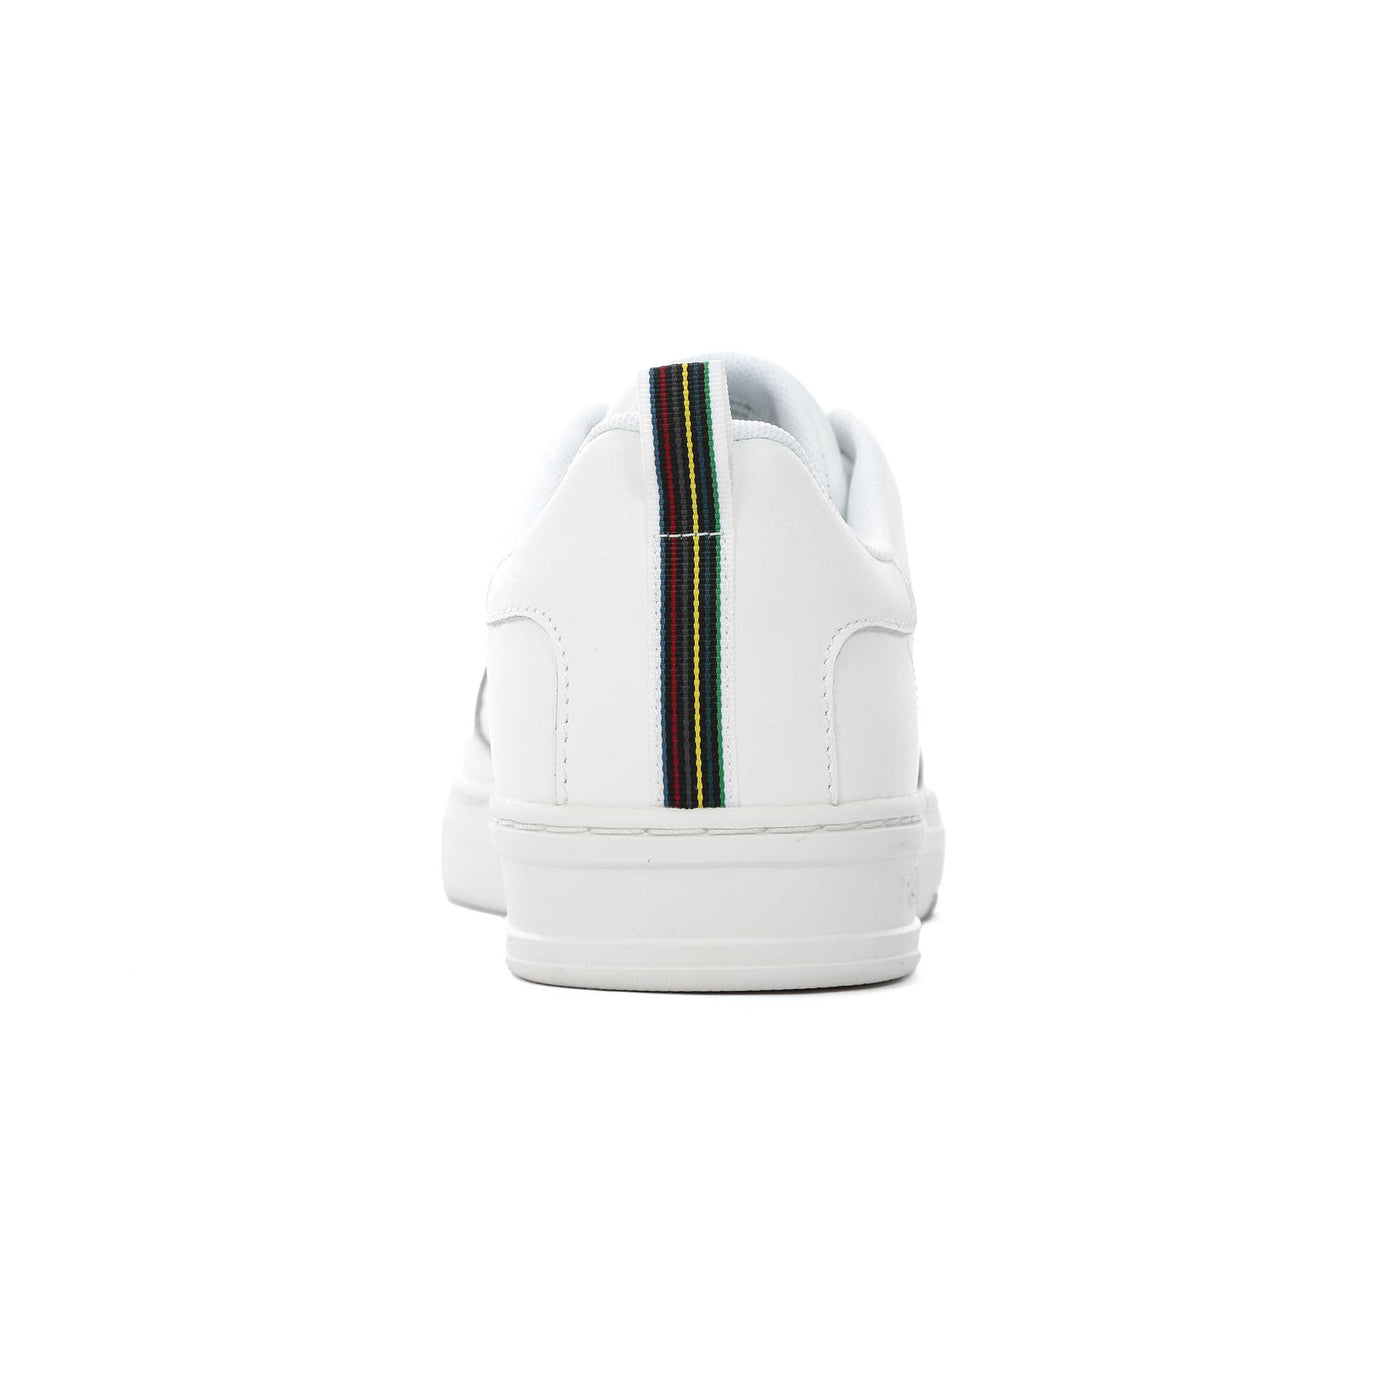 Paul Smith Cosmo Trainer in White Heel Pull